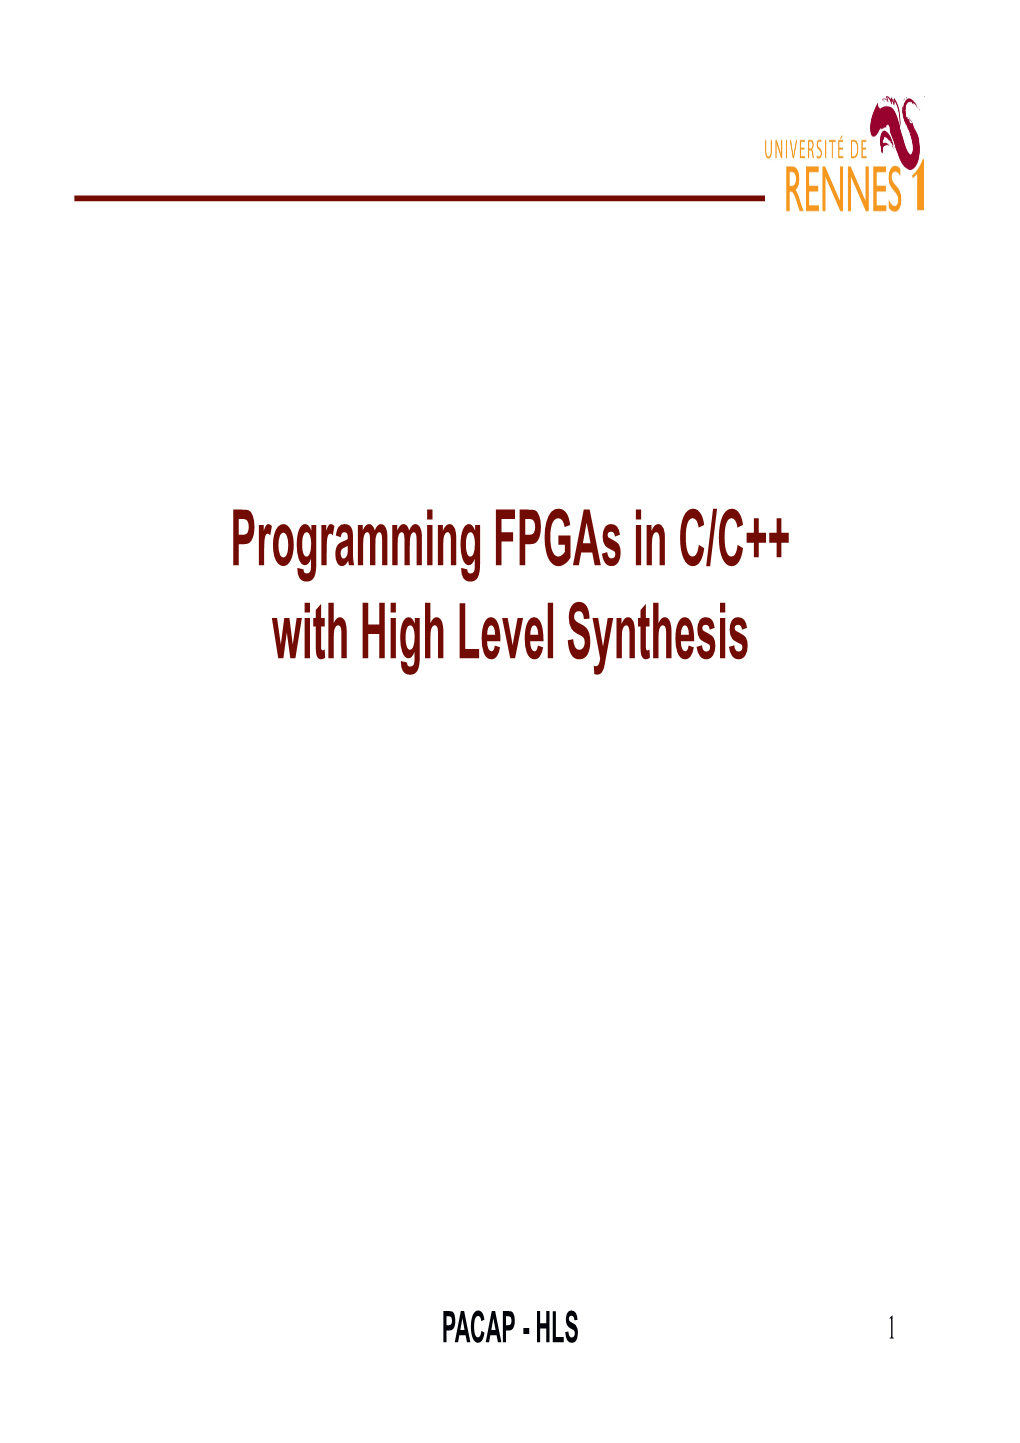 Programming Fpgas in C/C++ with High Level Synthesis